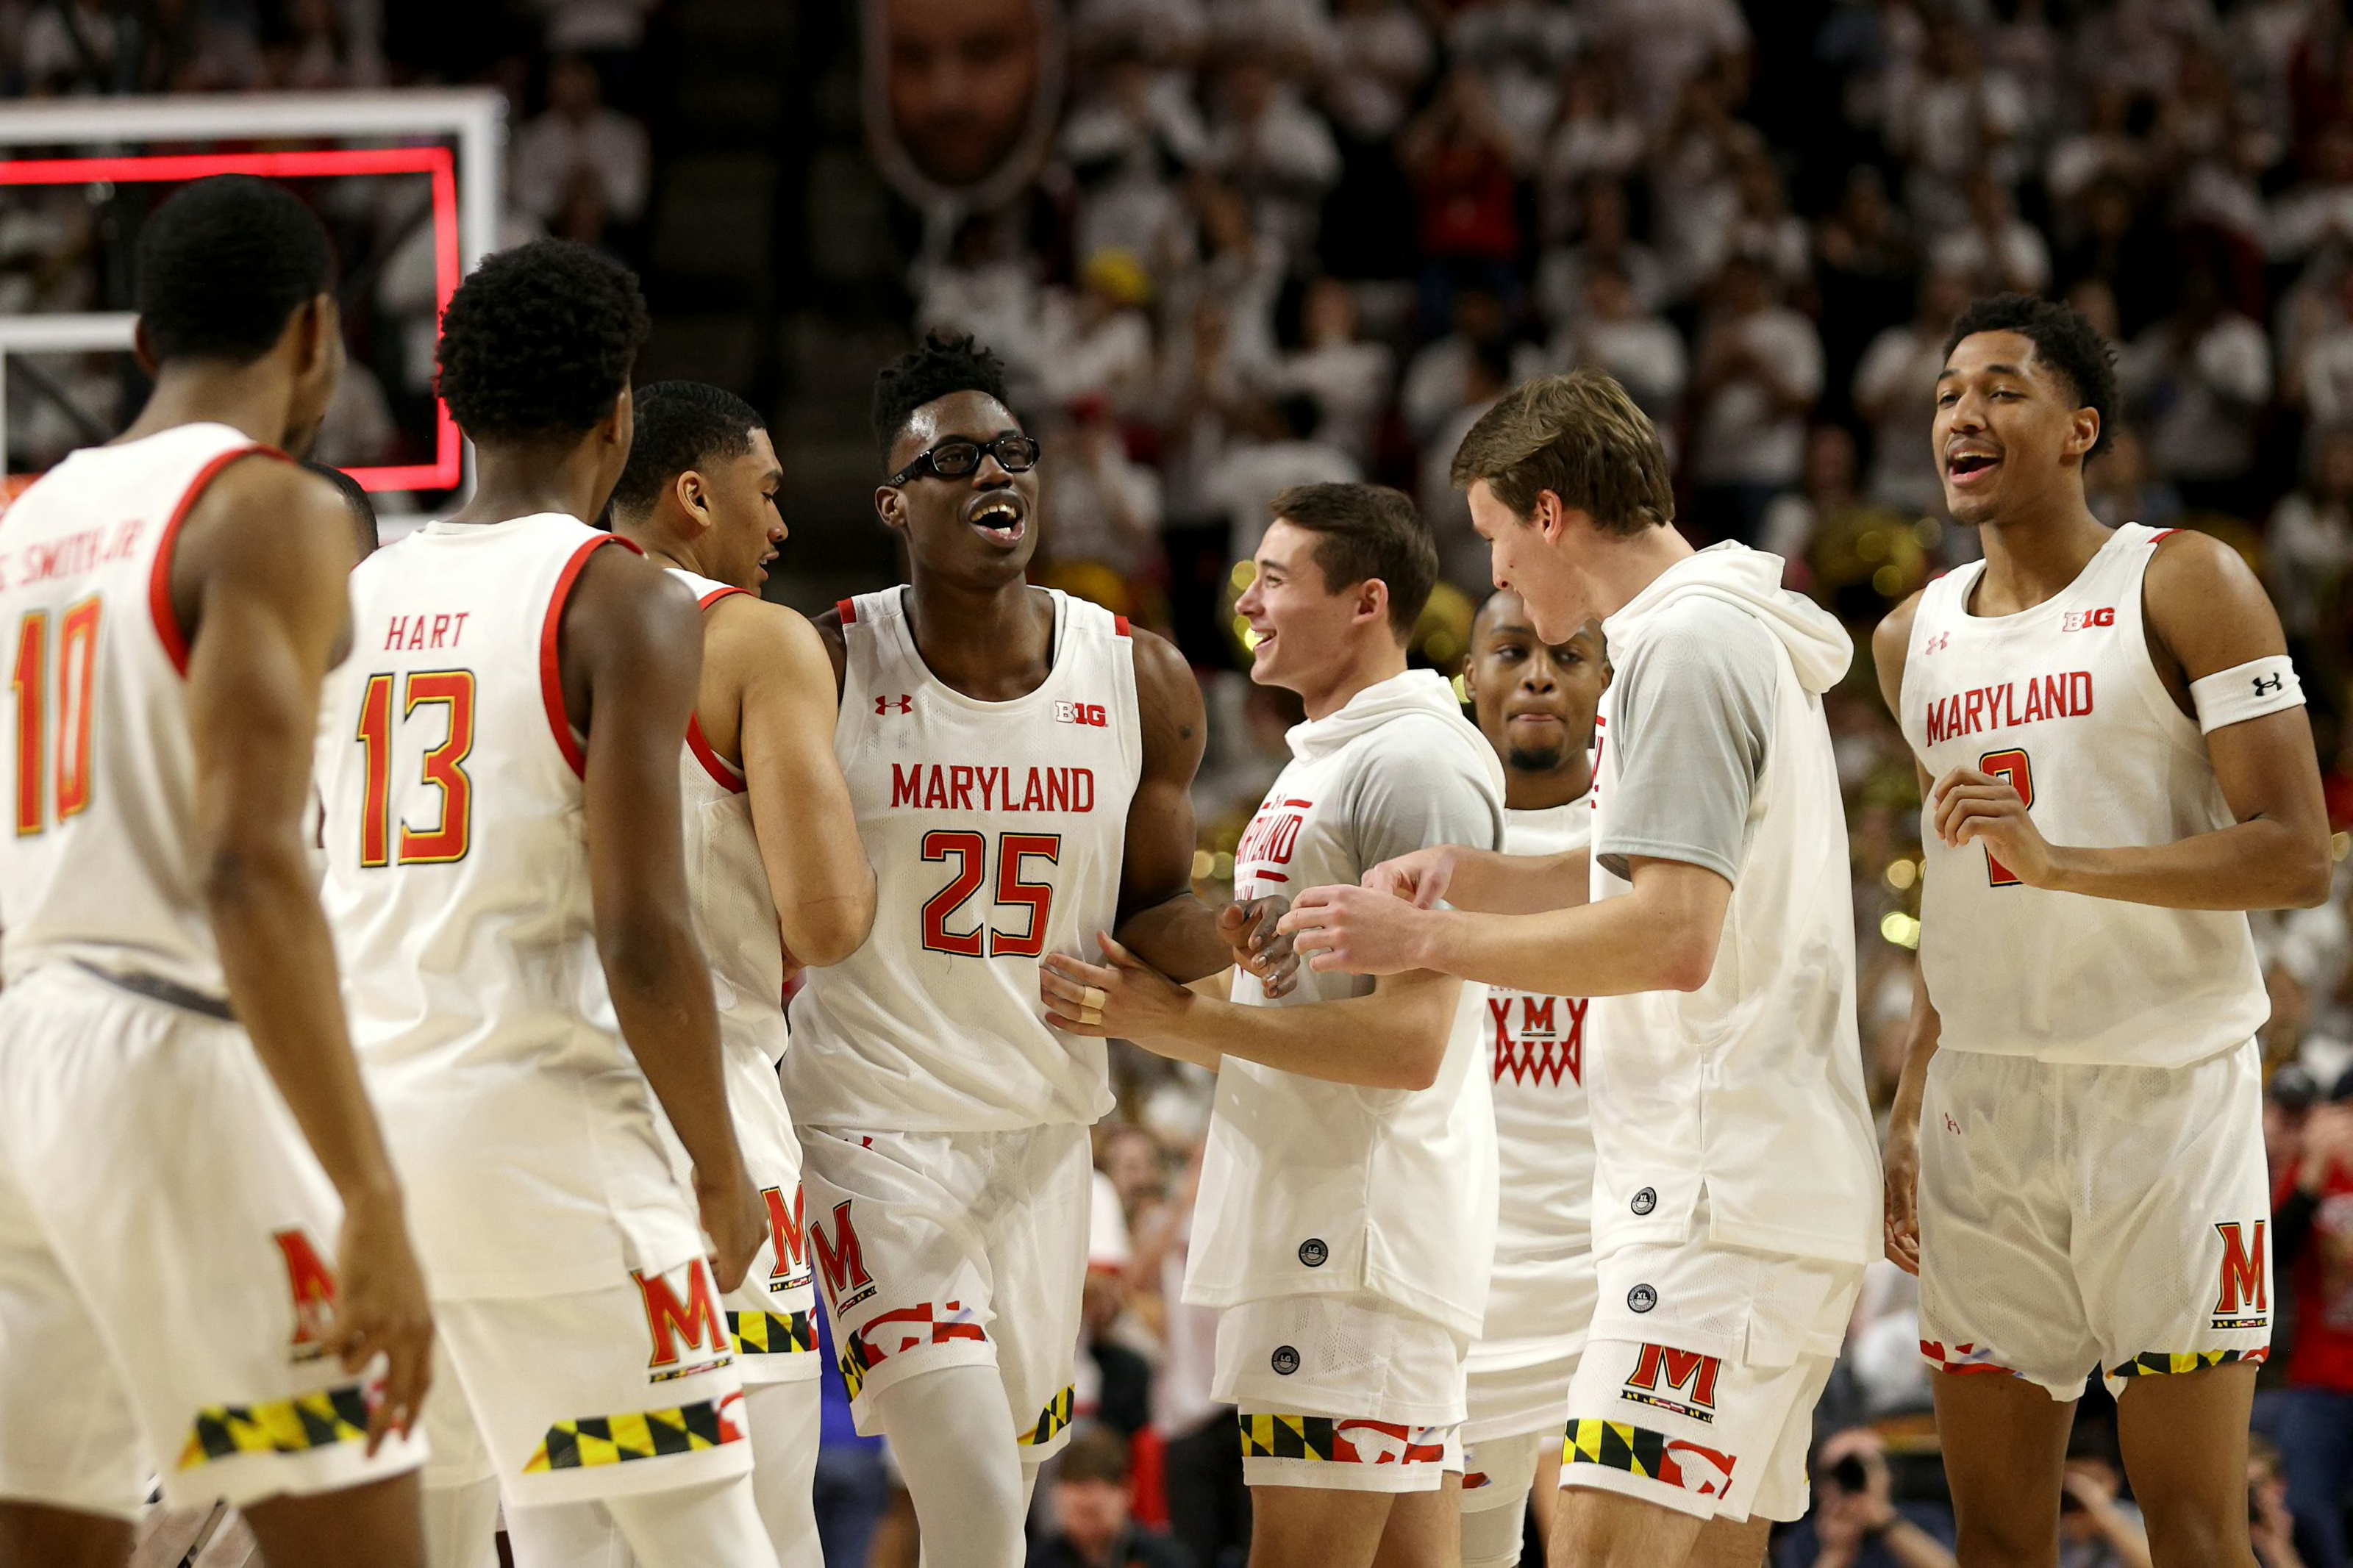 Maryland Basketball: Key players to watch on Terps for 2020-21 season